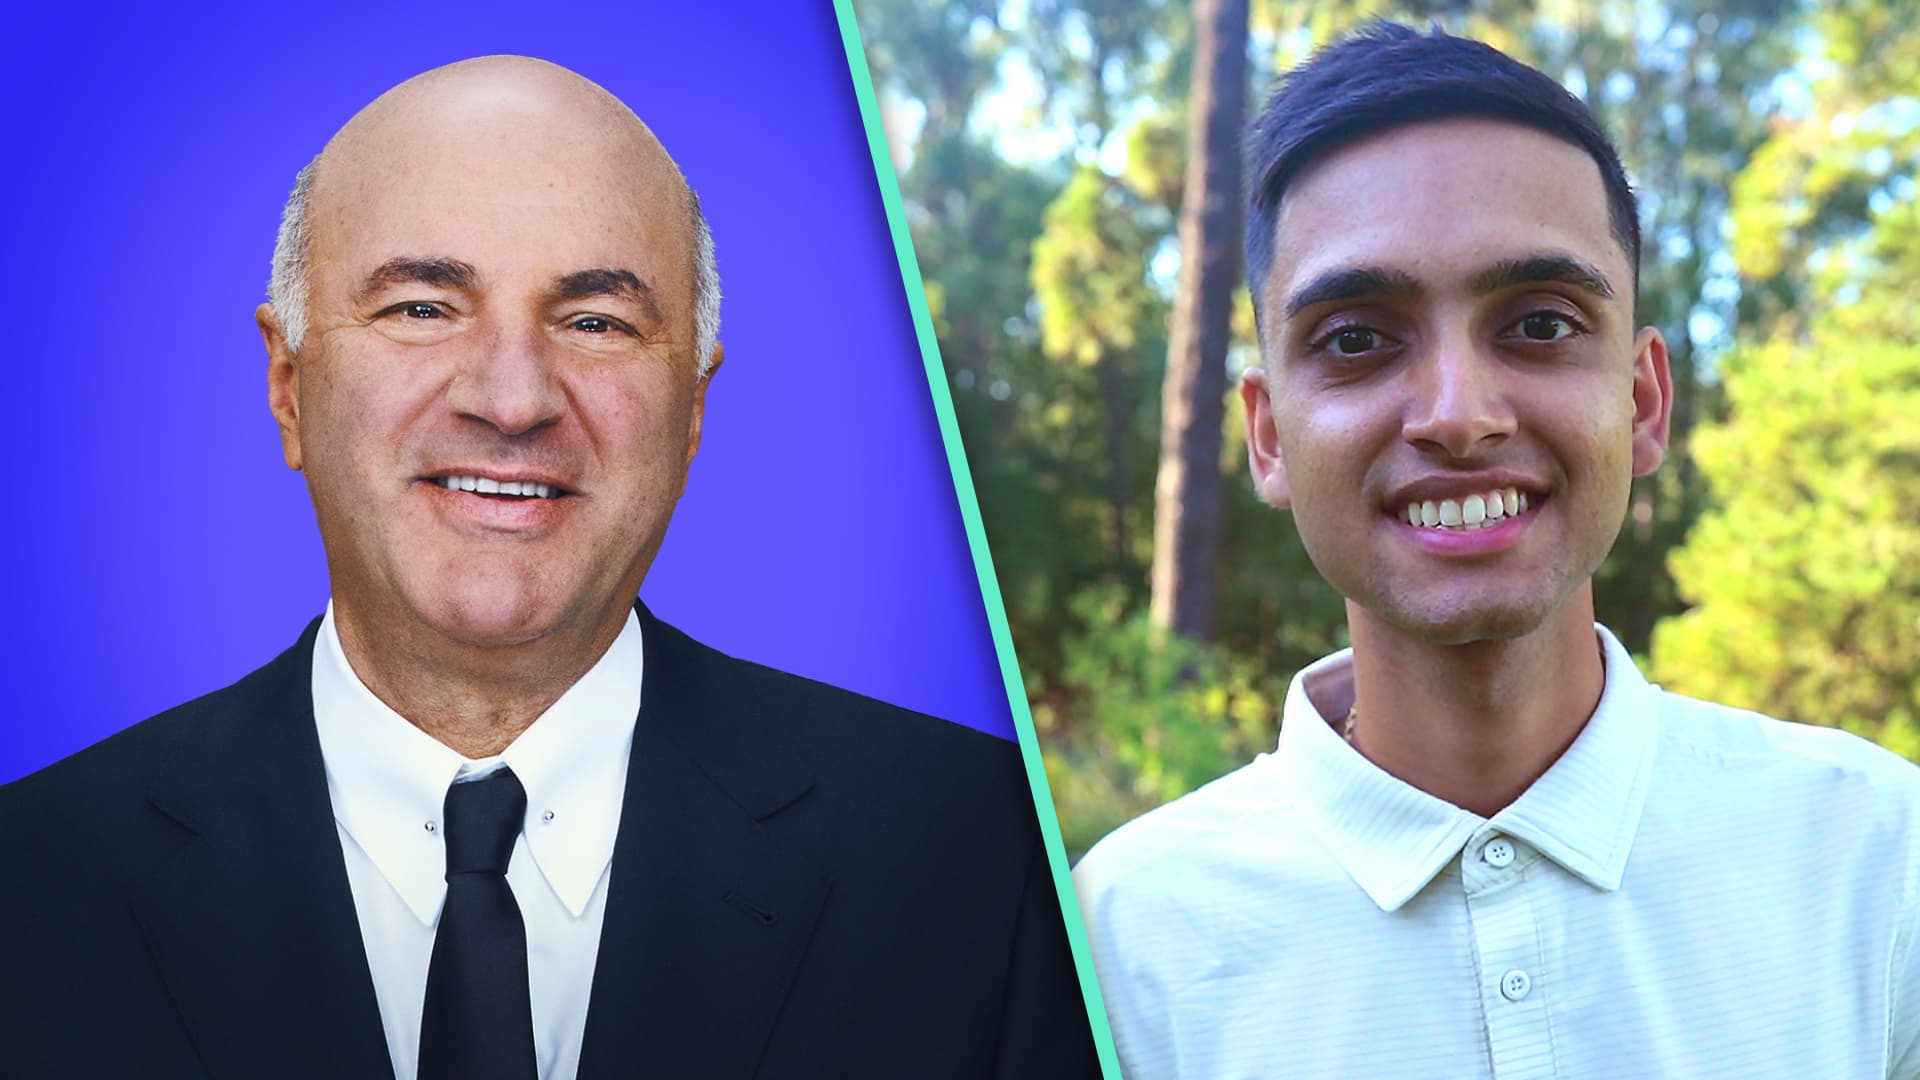 Kevin OLeary reacts to a 25-year-old earning $515,000 per year: 'This kid got it right'